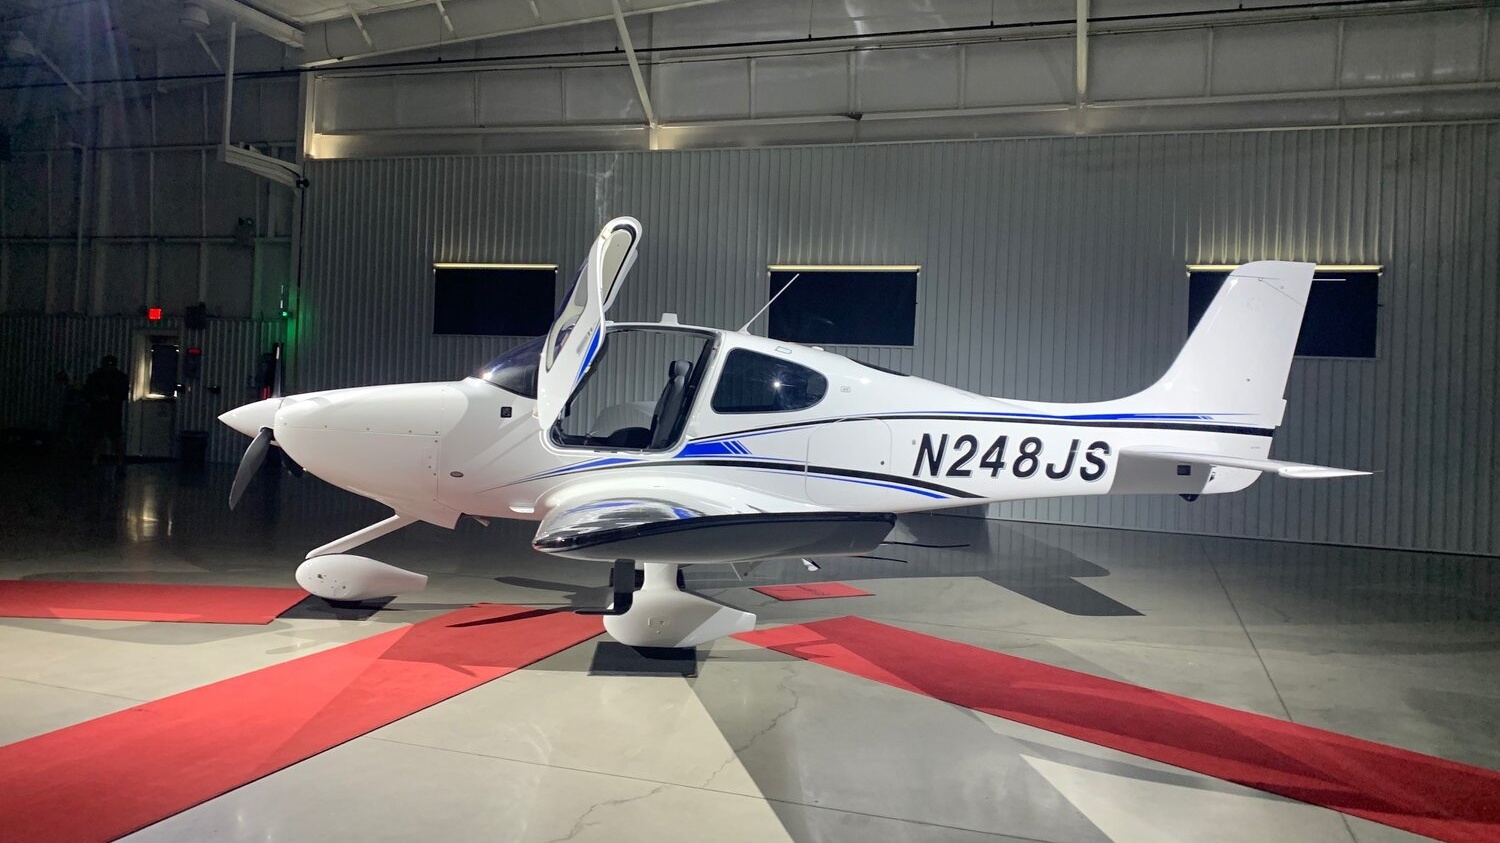 N248JS | 2020 Cirrus SR20 G6 with air conditioning, auto pilot, and Garmin Perspective+ (G1000) avionics